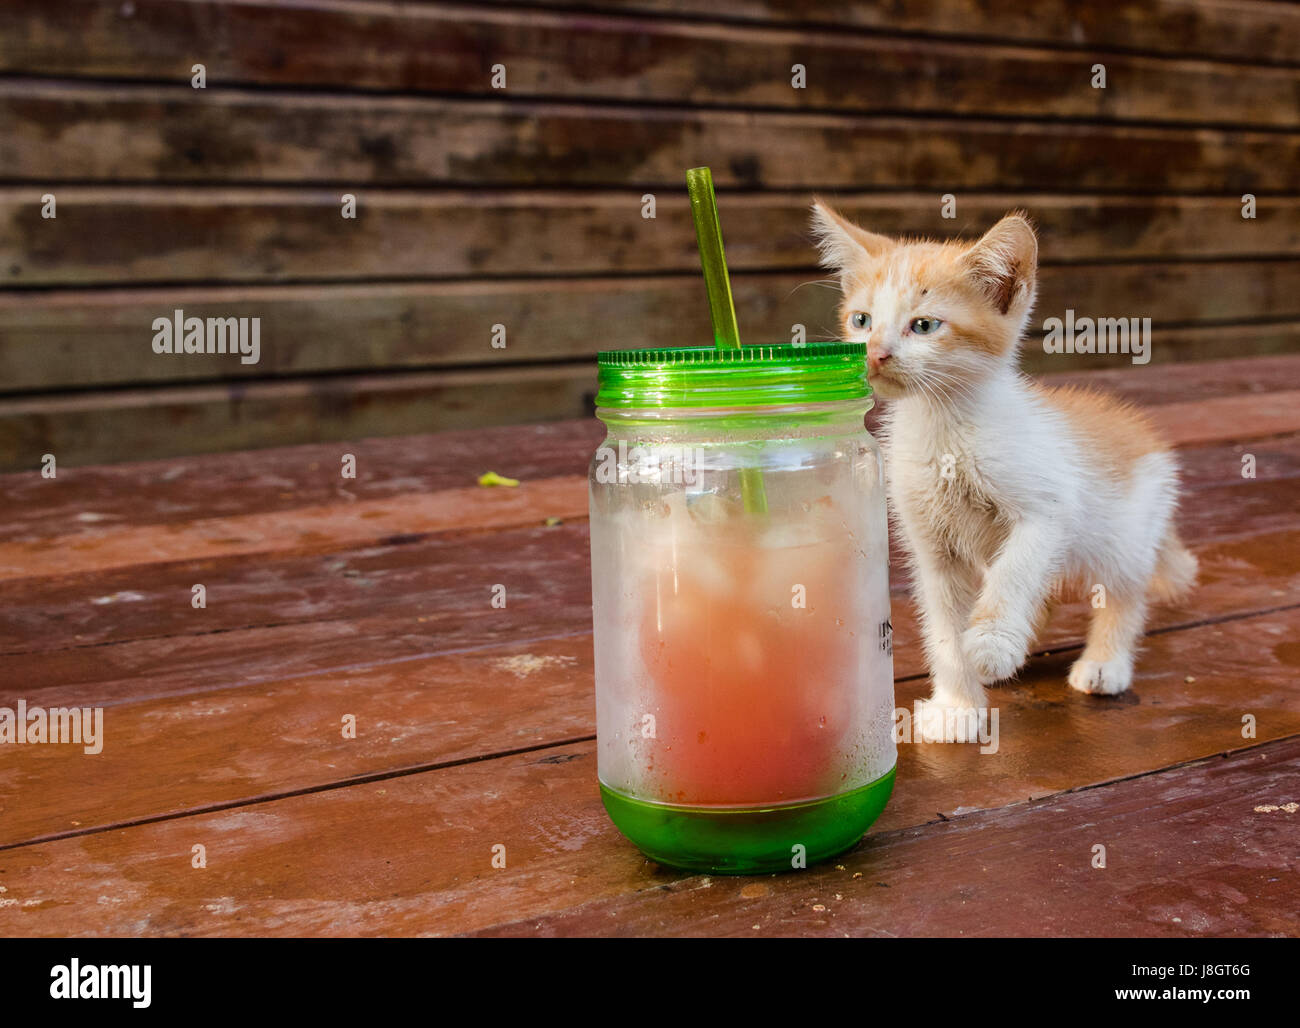 Tabby Kitten Playing With Cup Stock Photo